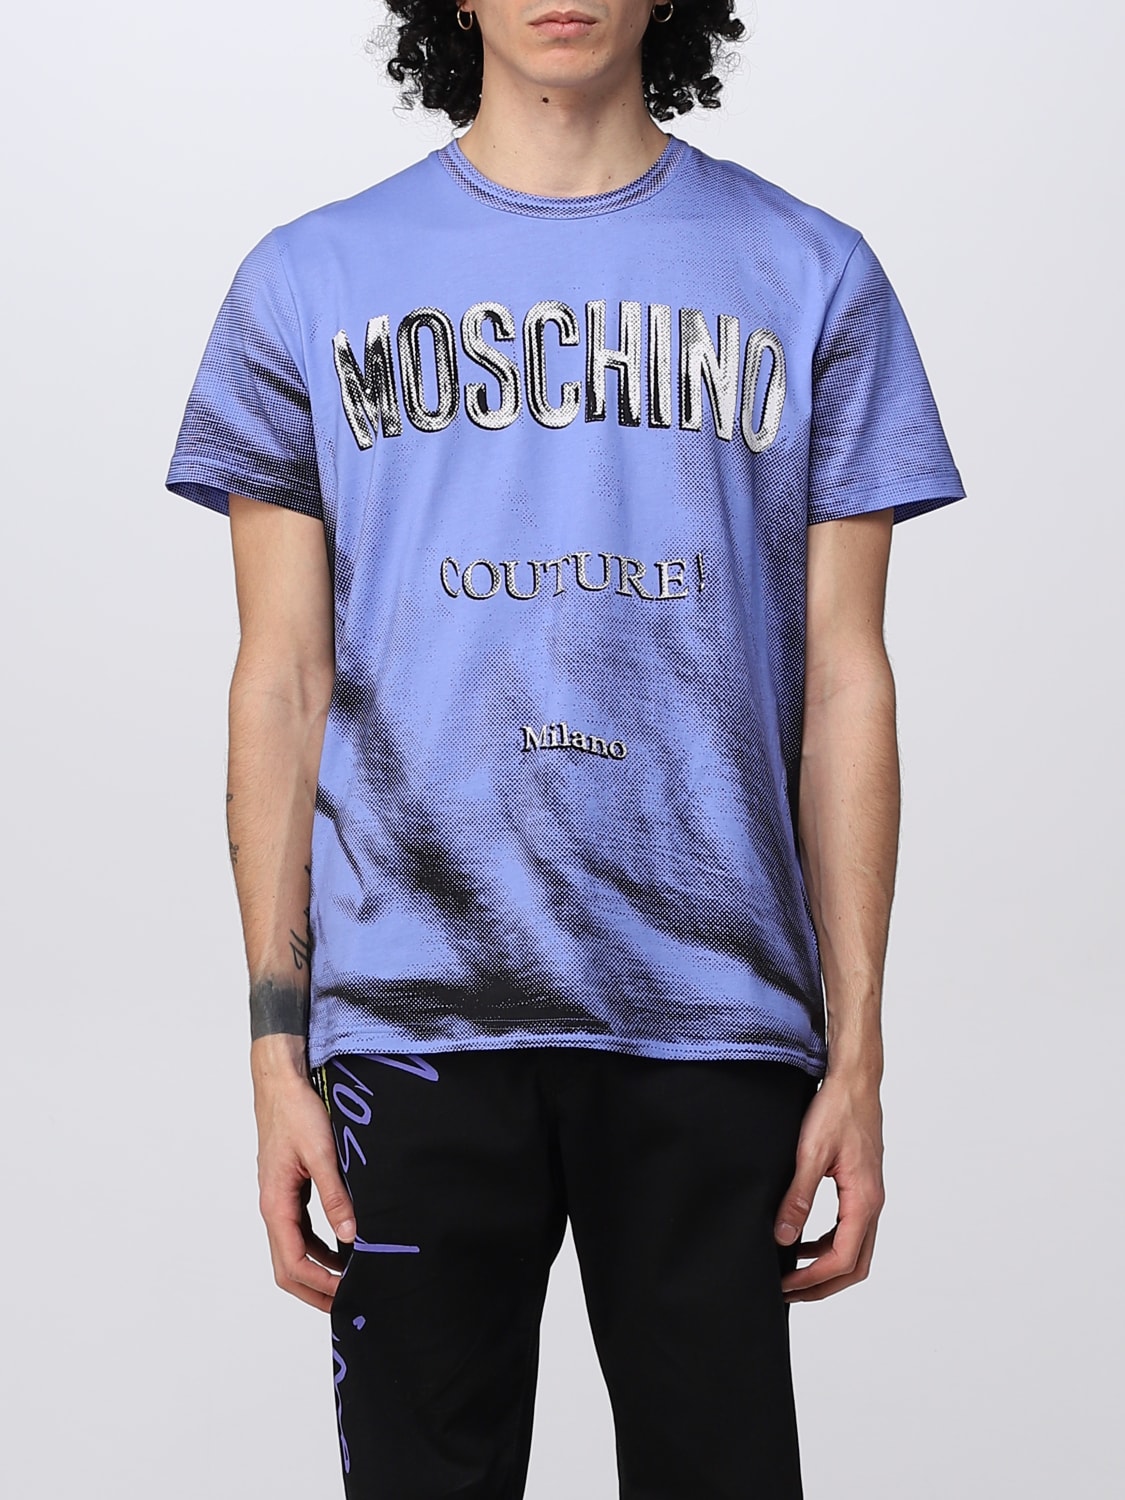 MOSCHINO COUTURE：Tシャツ メンズ - アジュール | GIGLIO.COM